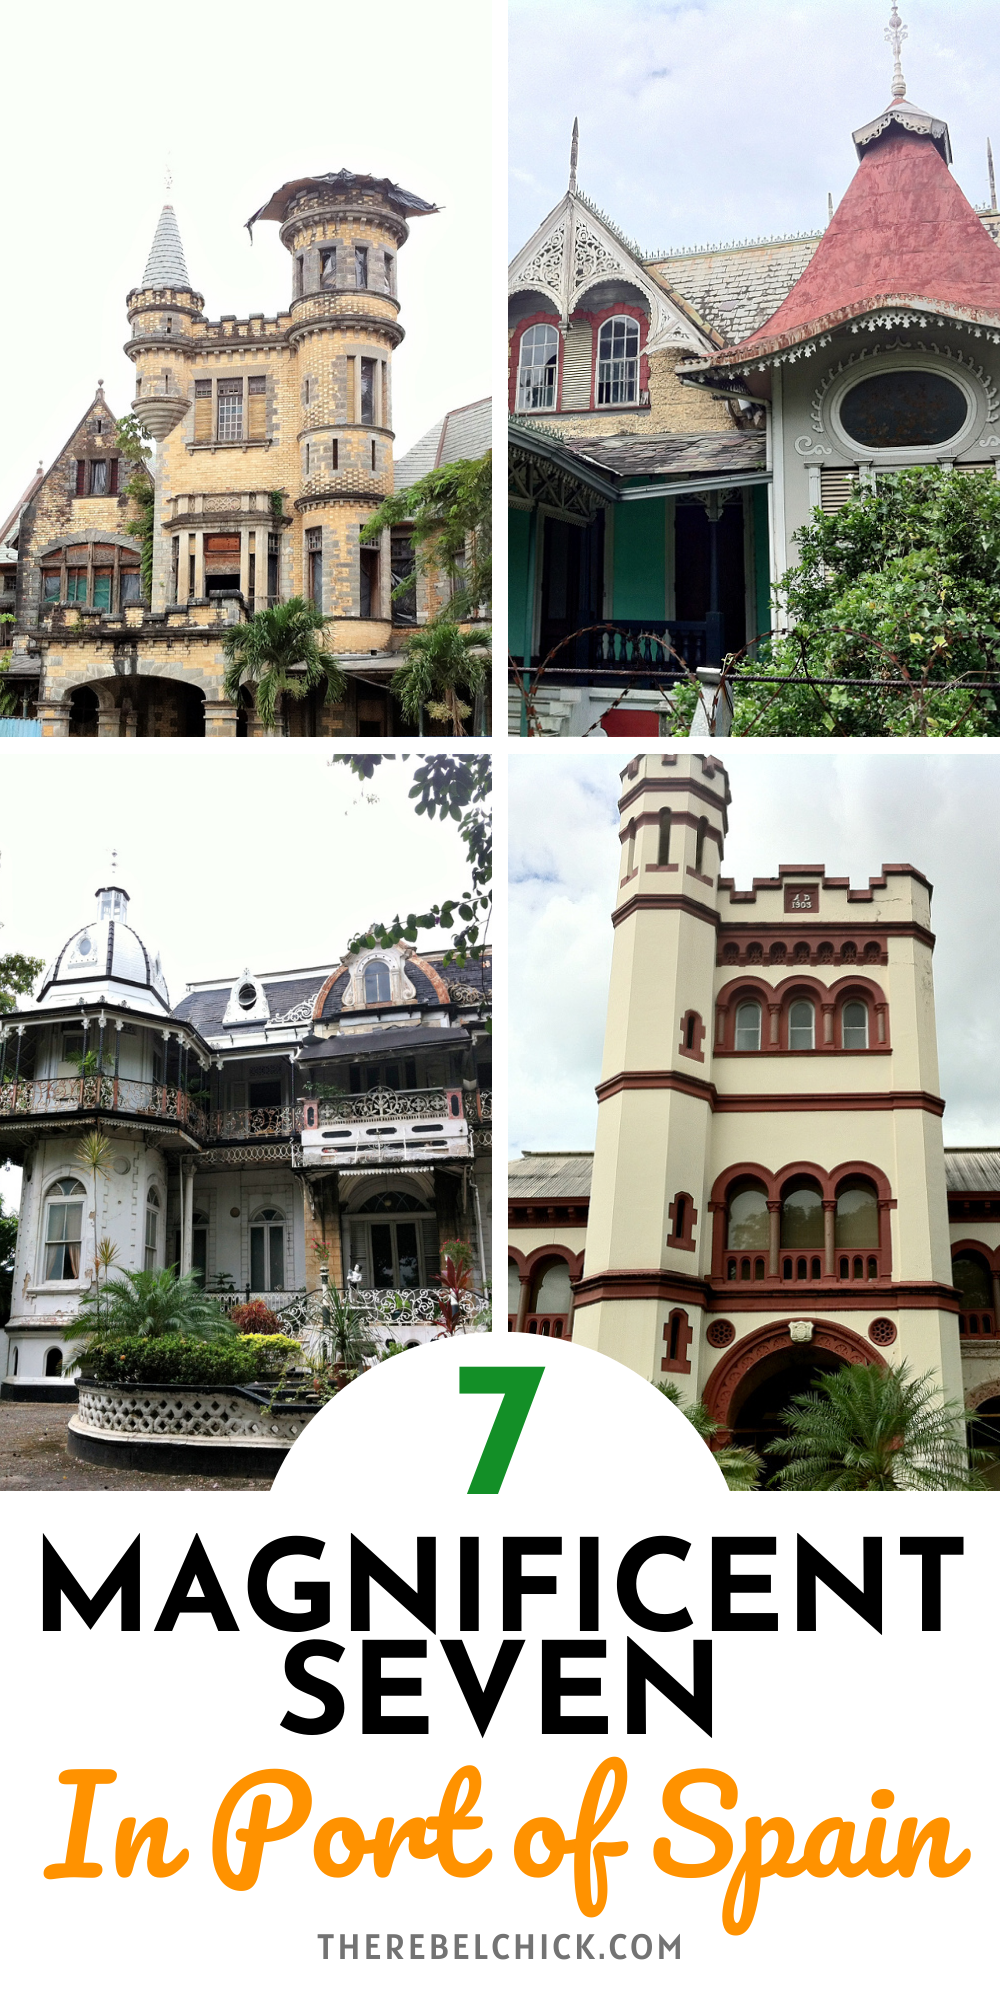 The Magnificent Seven In Port of Spain, Trinidad - Breathtaking Architecture of Trinidad